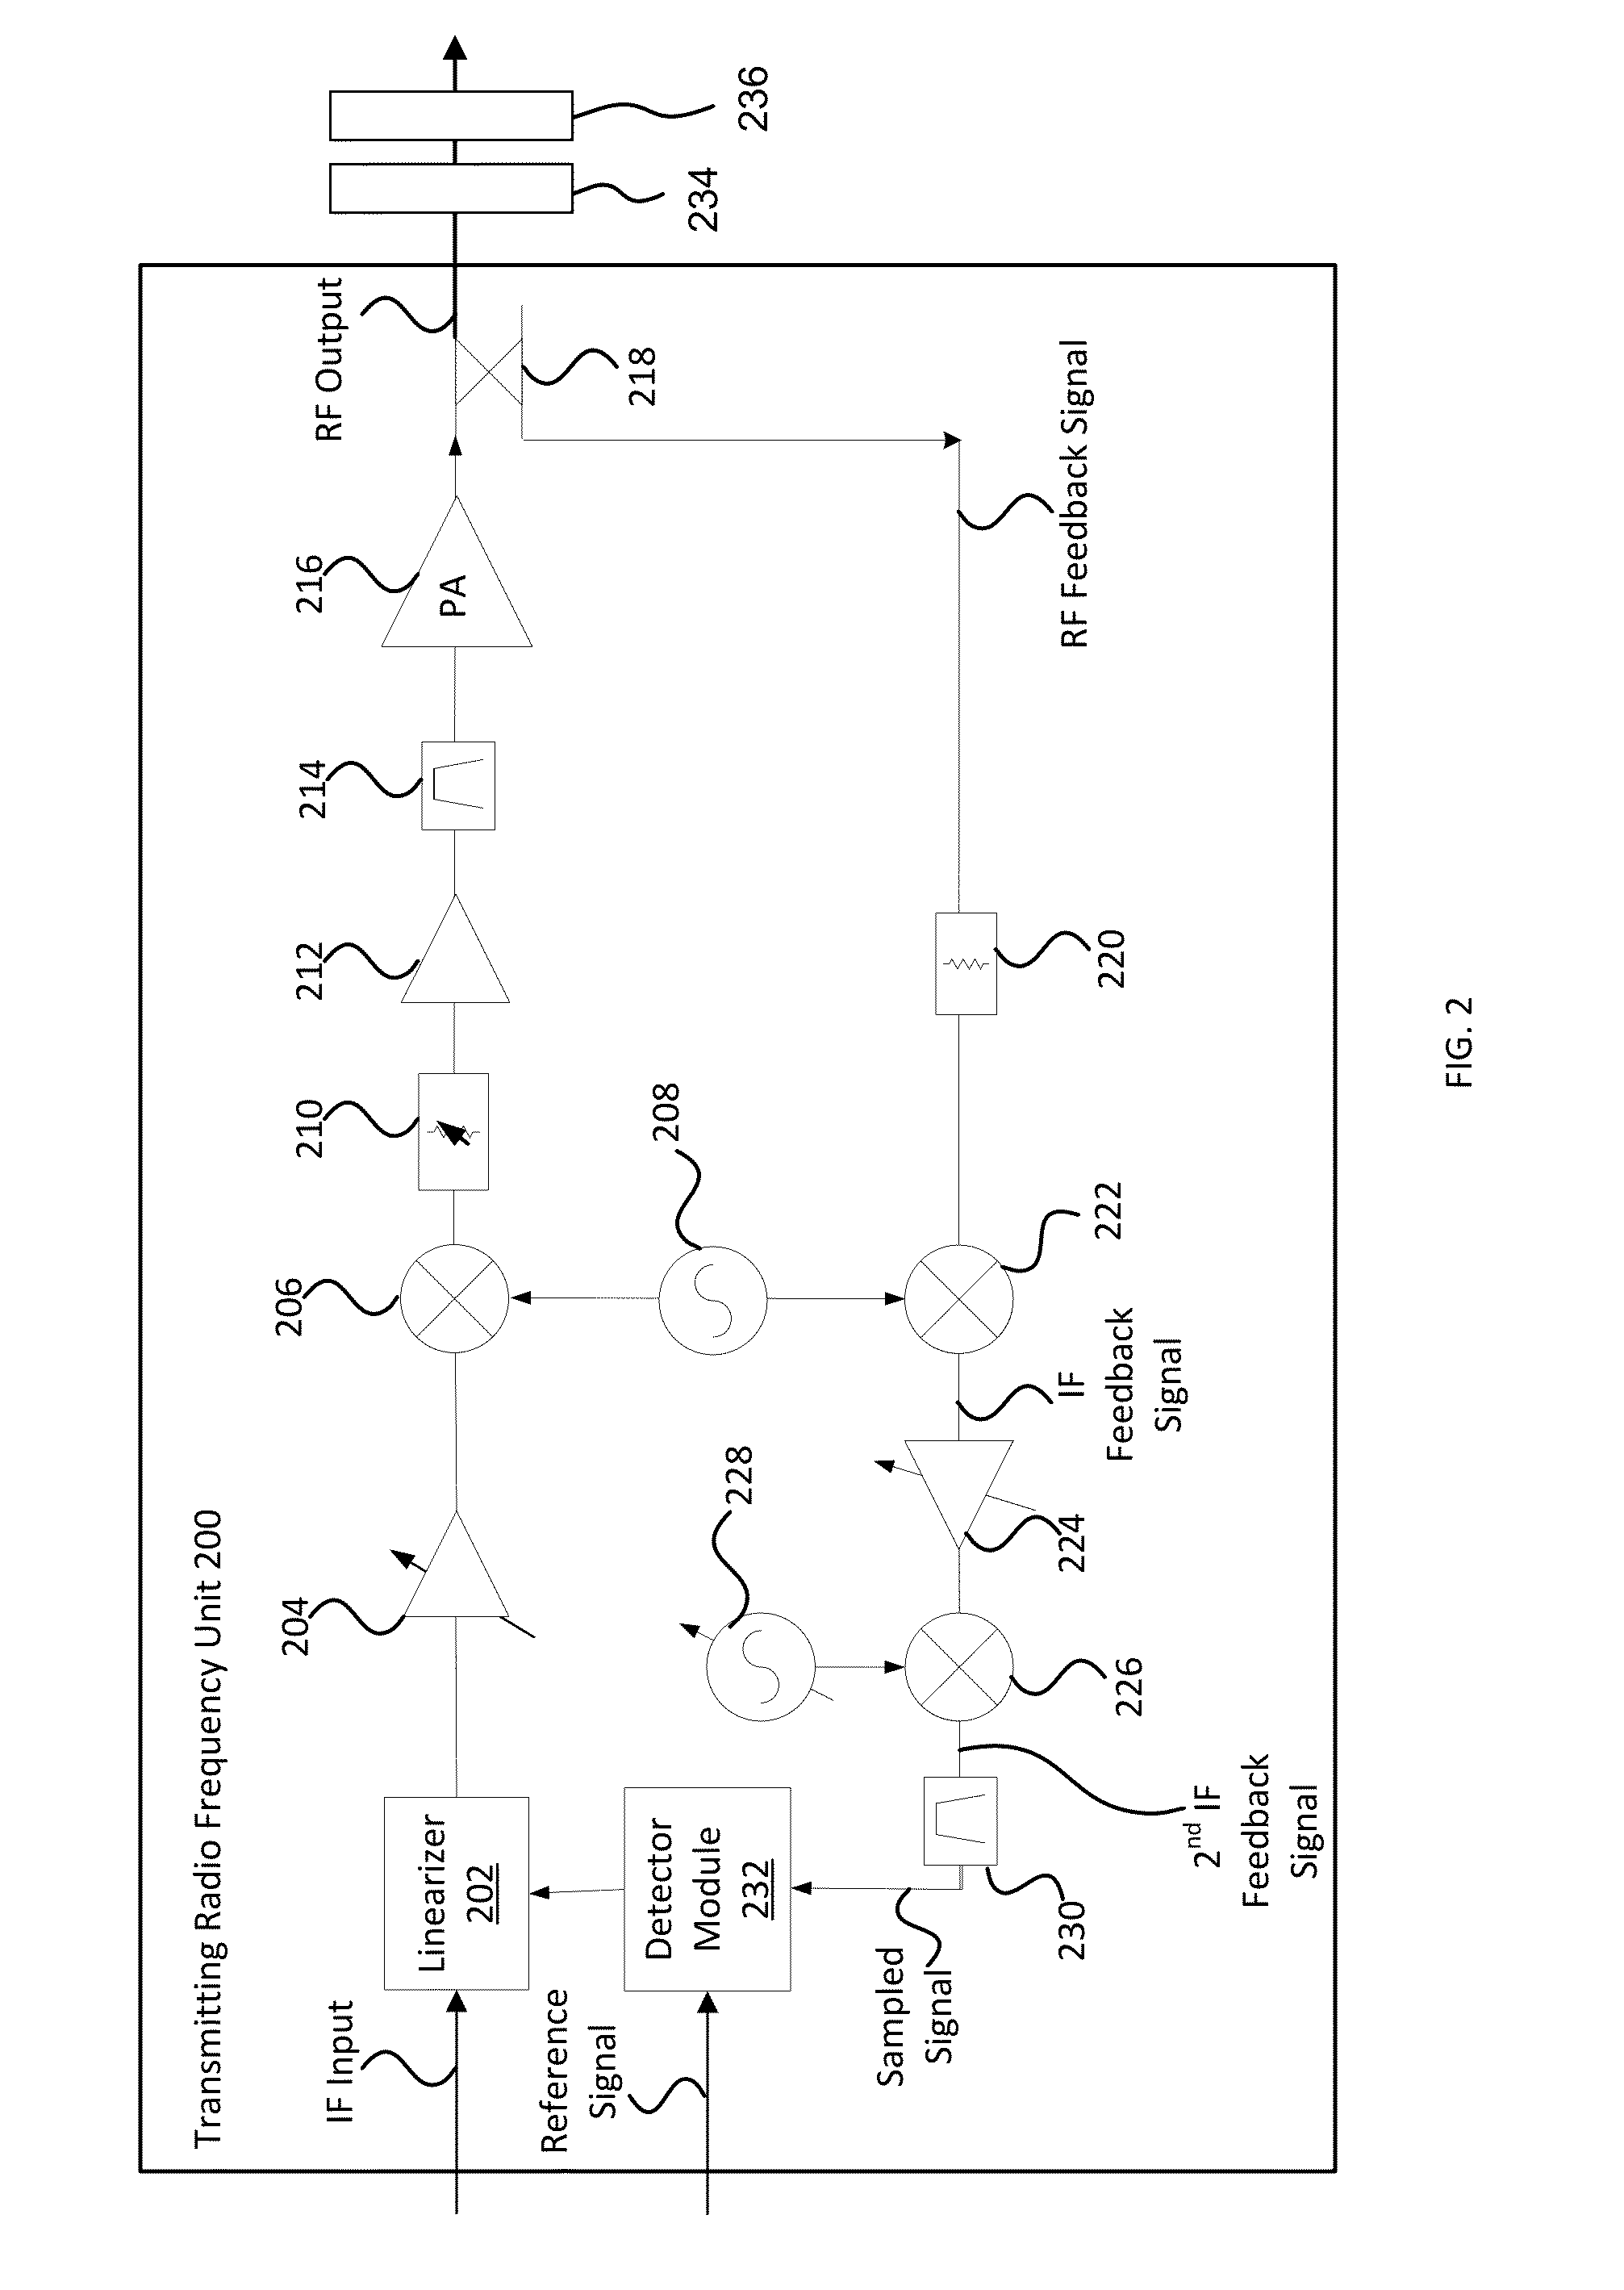 Systems and Methods for Adaptive Power Amplifier Linearization